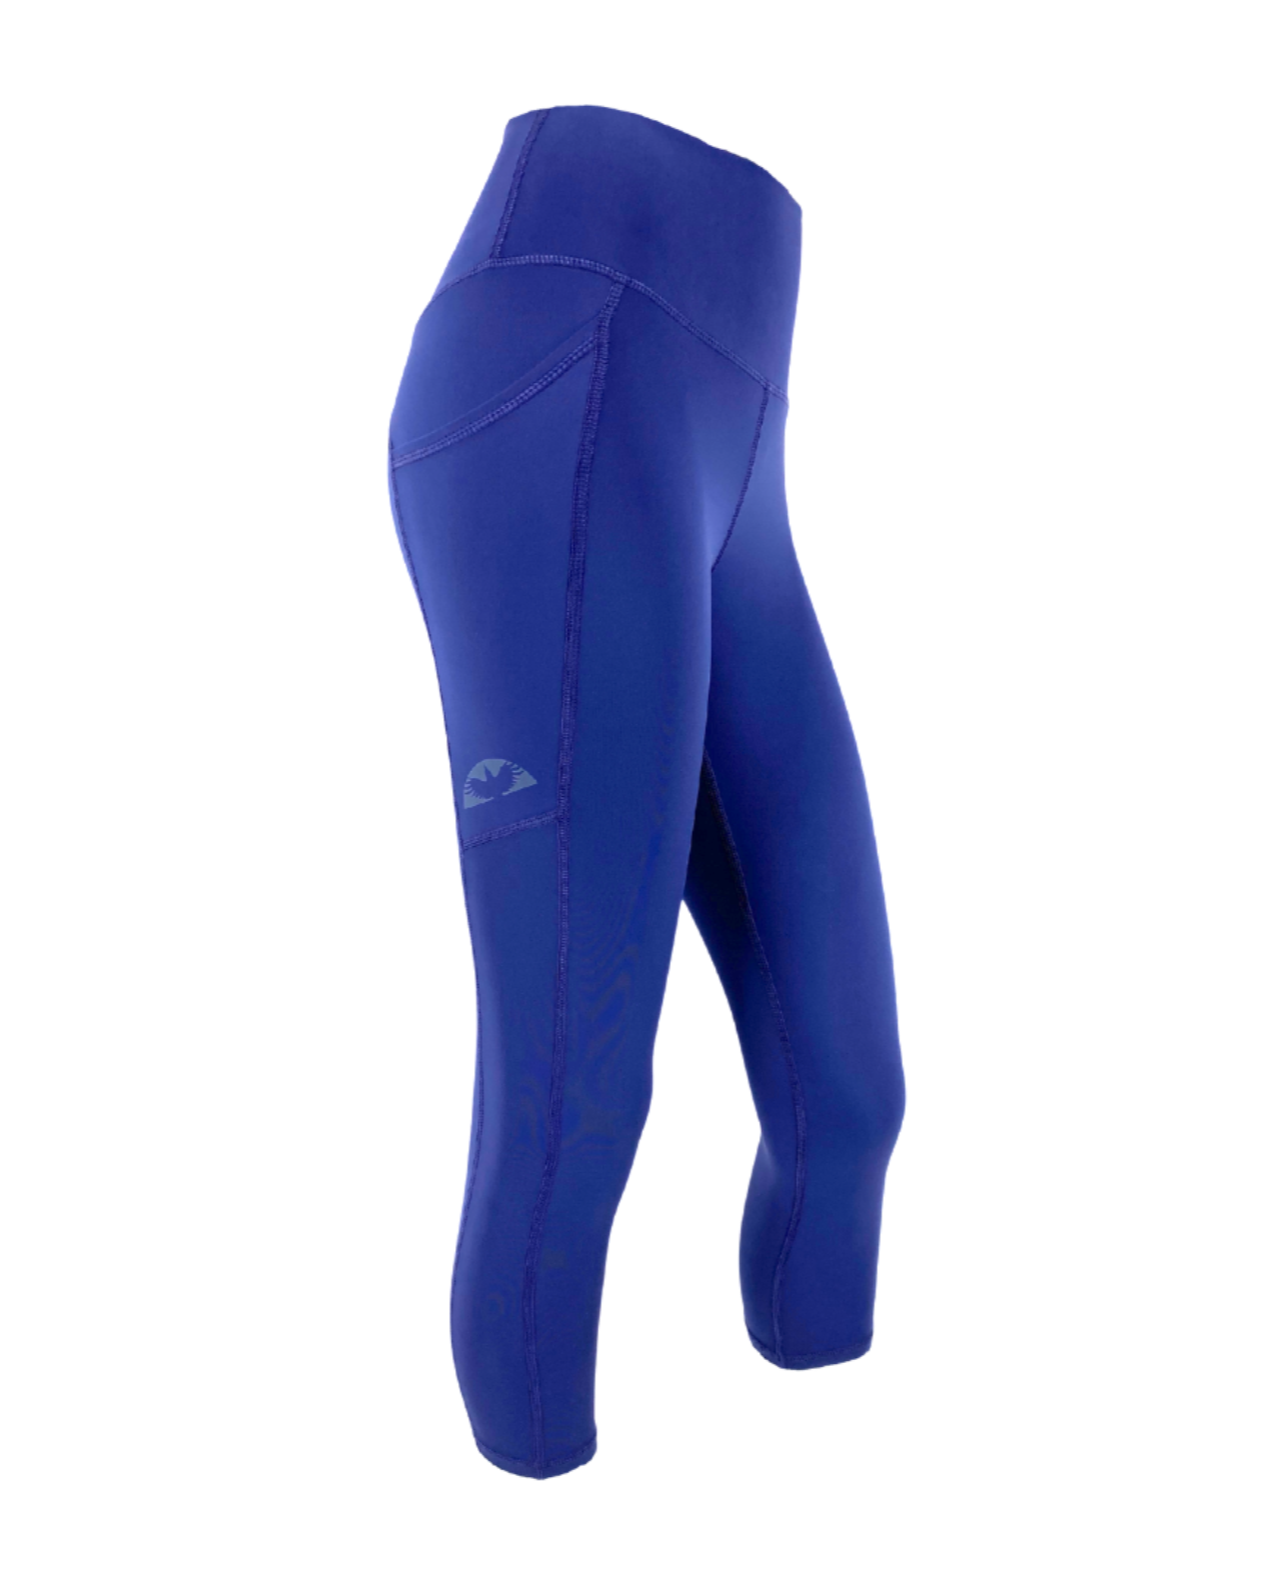 Warehouse Sale Clearance Workout Leggings For Women With Pocket –  SkyRockSports